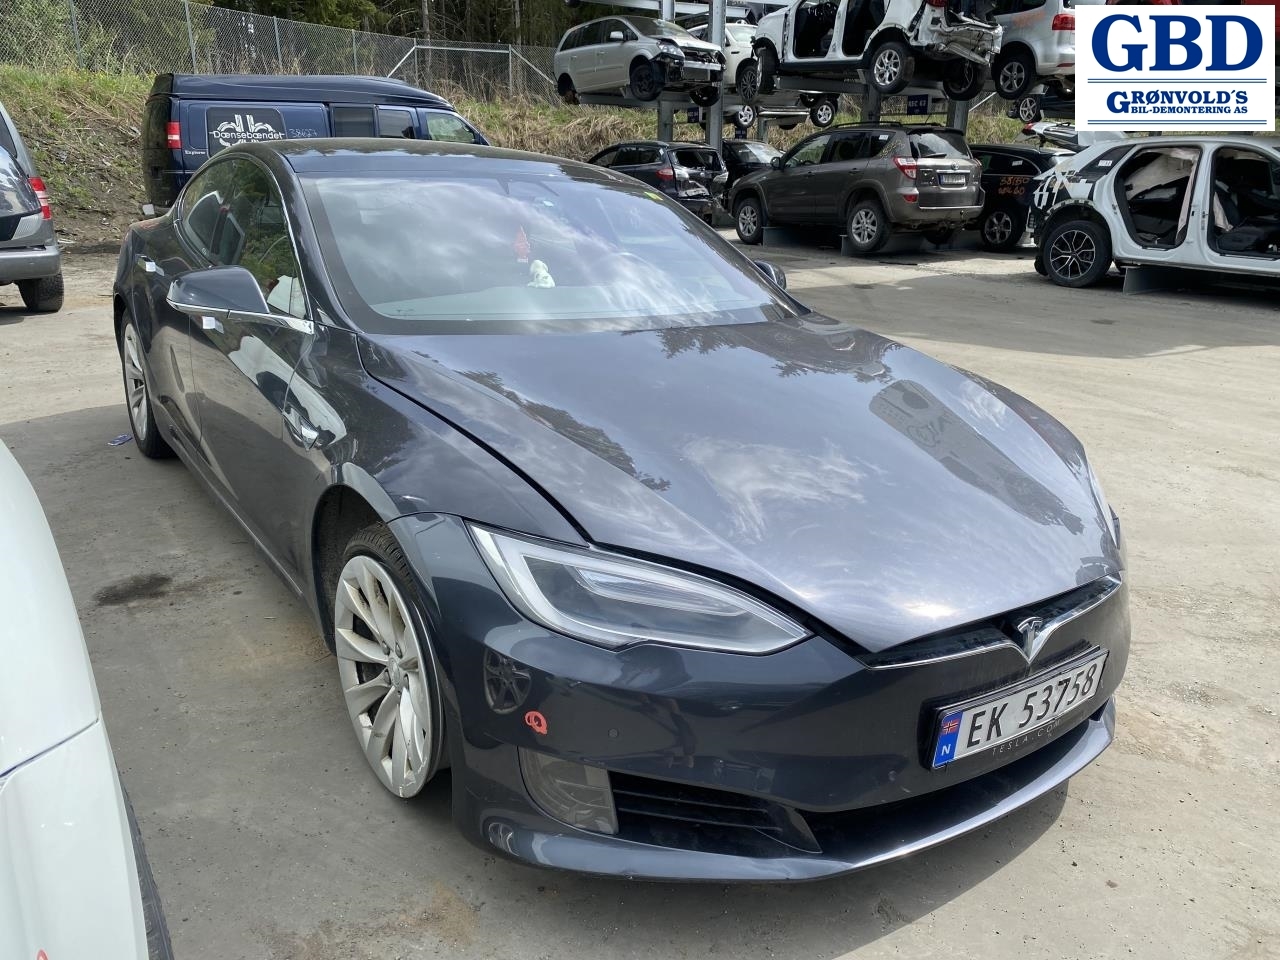 Tesla Model S, 2016- (Fase 2) parts car, Engine code: L2S, Gearbox code: 